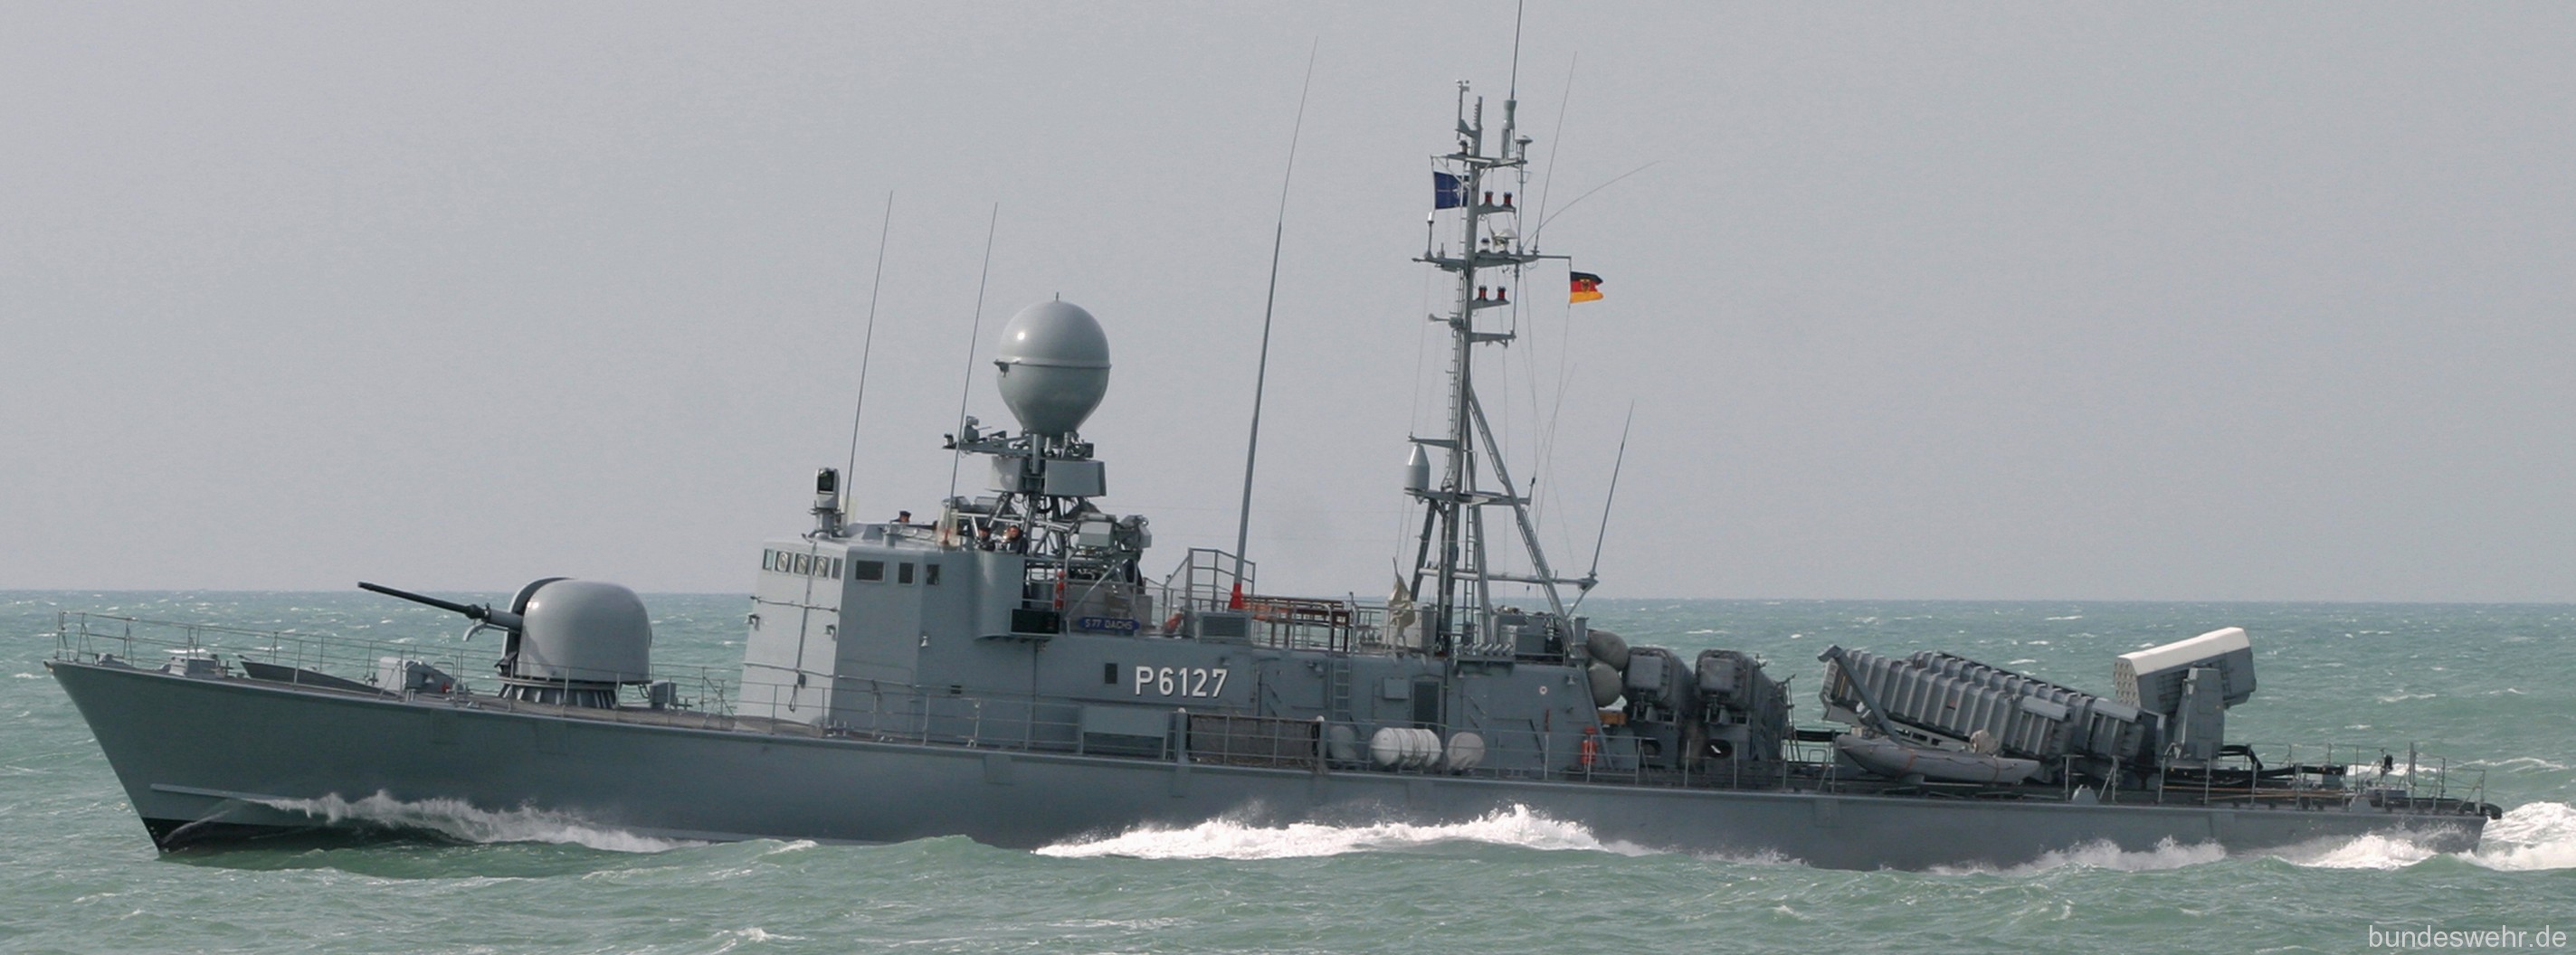 p6127 s77 fgs dachs type 143a gepard class fast attack missile craft german navy 02